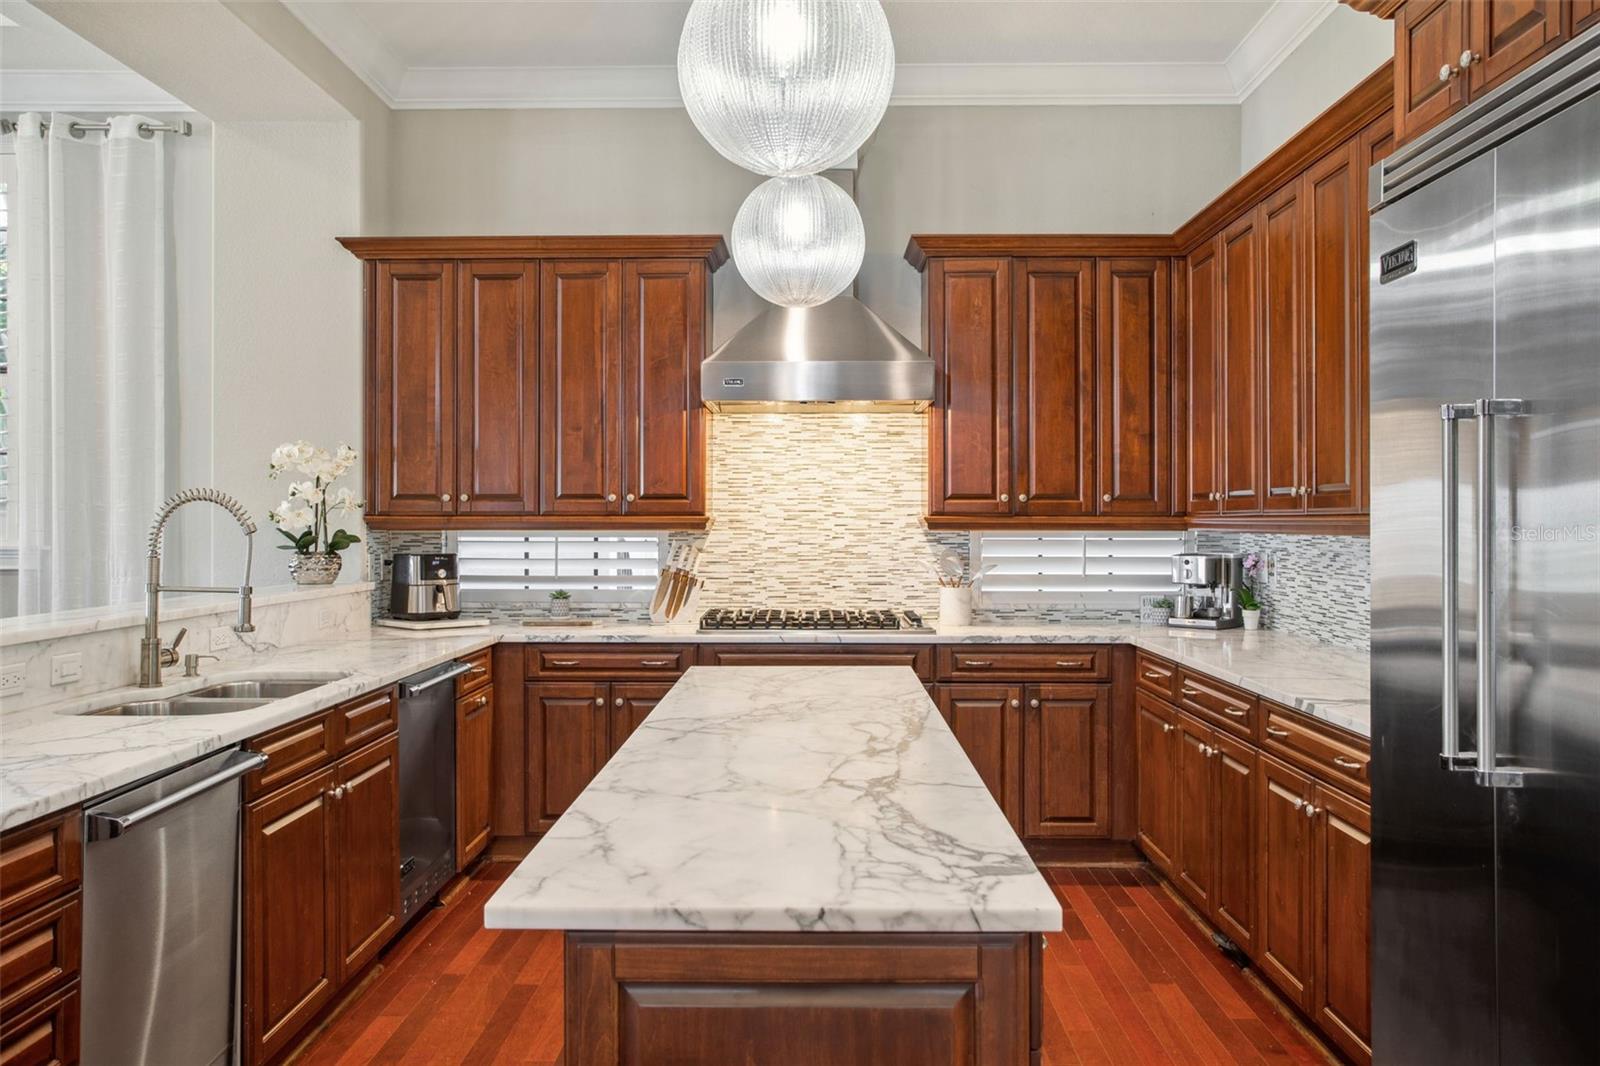 Easily entertain in this gourmet kitchen with stunning quartz countertops.